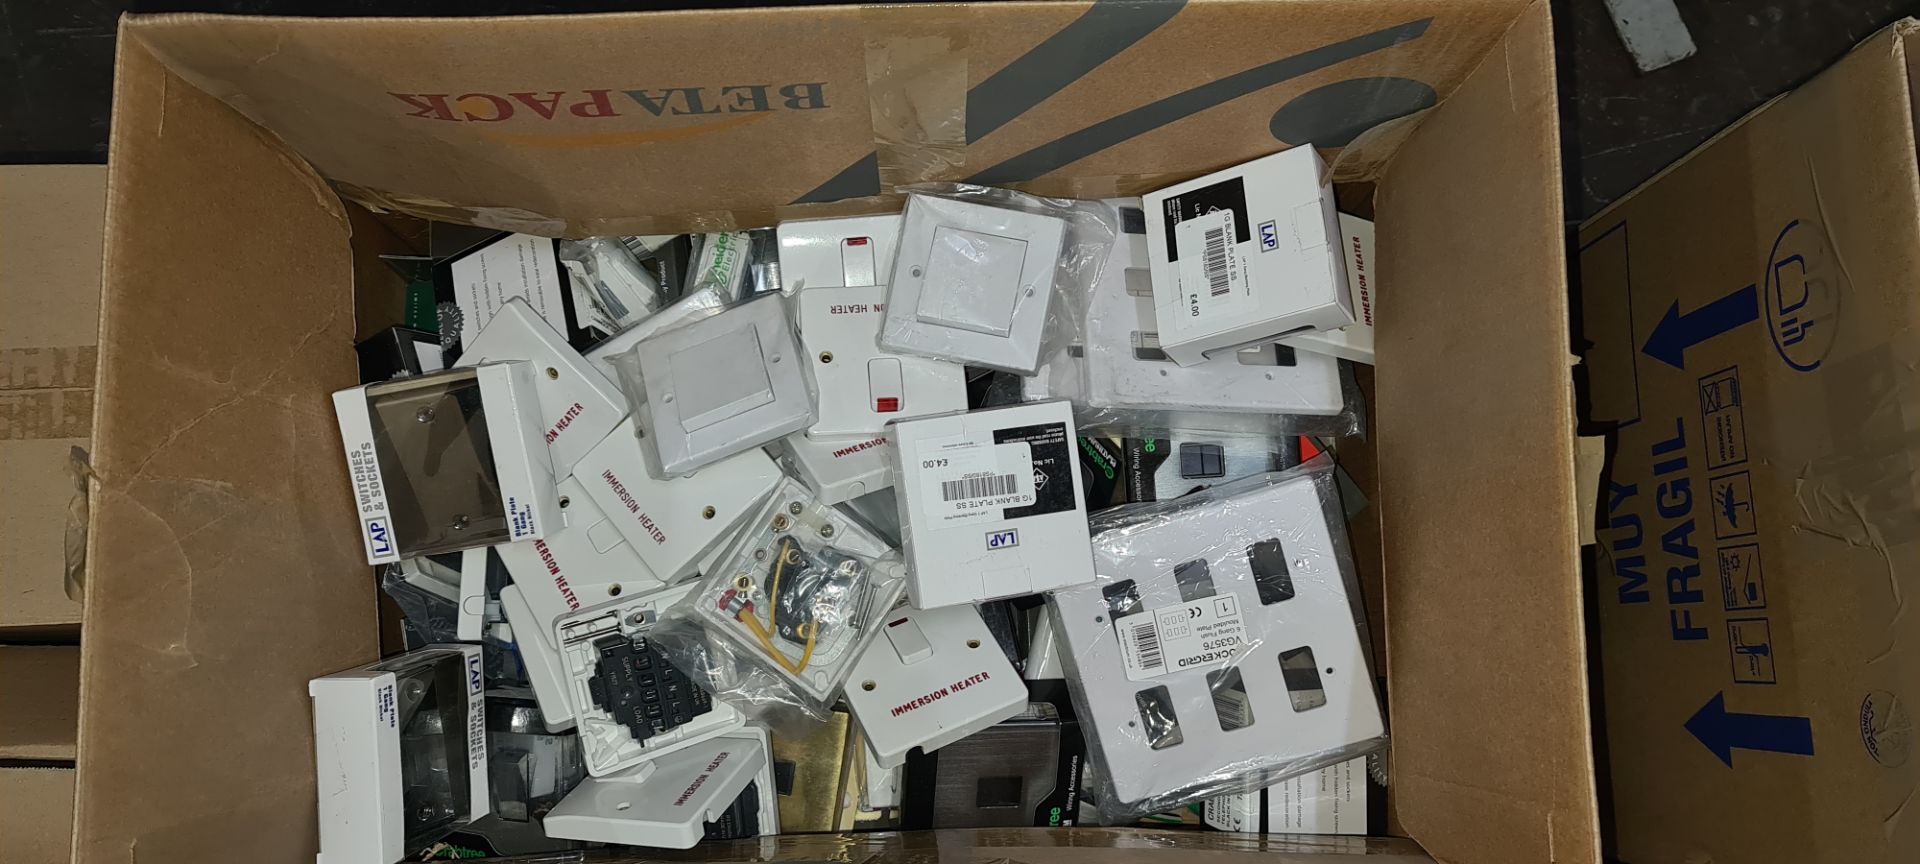 Large box of assorted switches & sockets by a variety of brands